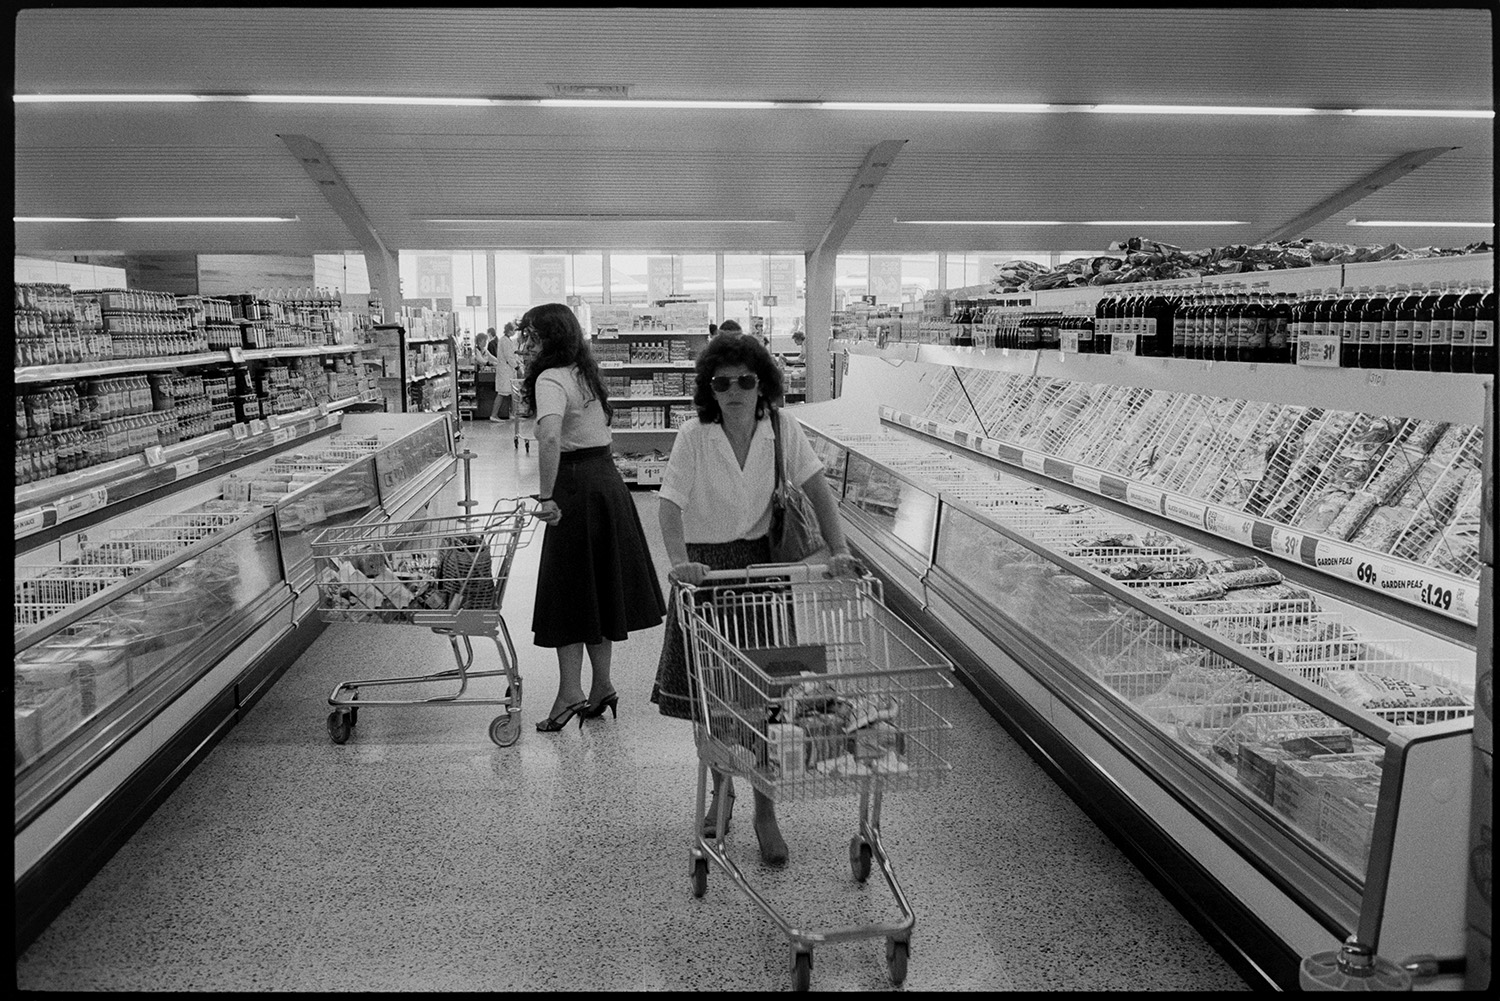 Interior of supermarket, people shopping, car park. Fruit, cash desk, check out.
[Two women pushing trolleys containing their shopping between two long chiller cabinets in Presto Food Market in Bideford. Bottles and cans are stacked on shelves above the freezer cabinets. One of the women is wearing a pair of sunglasses.]